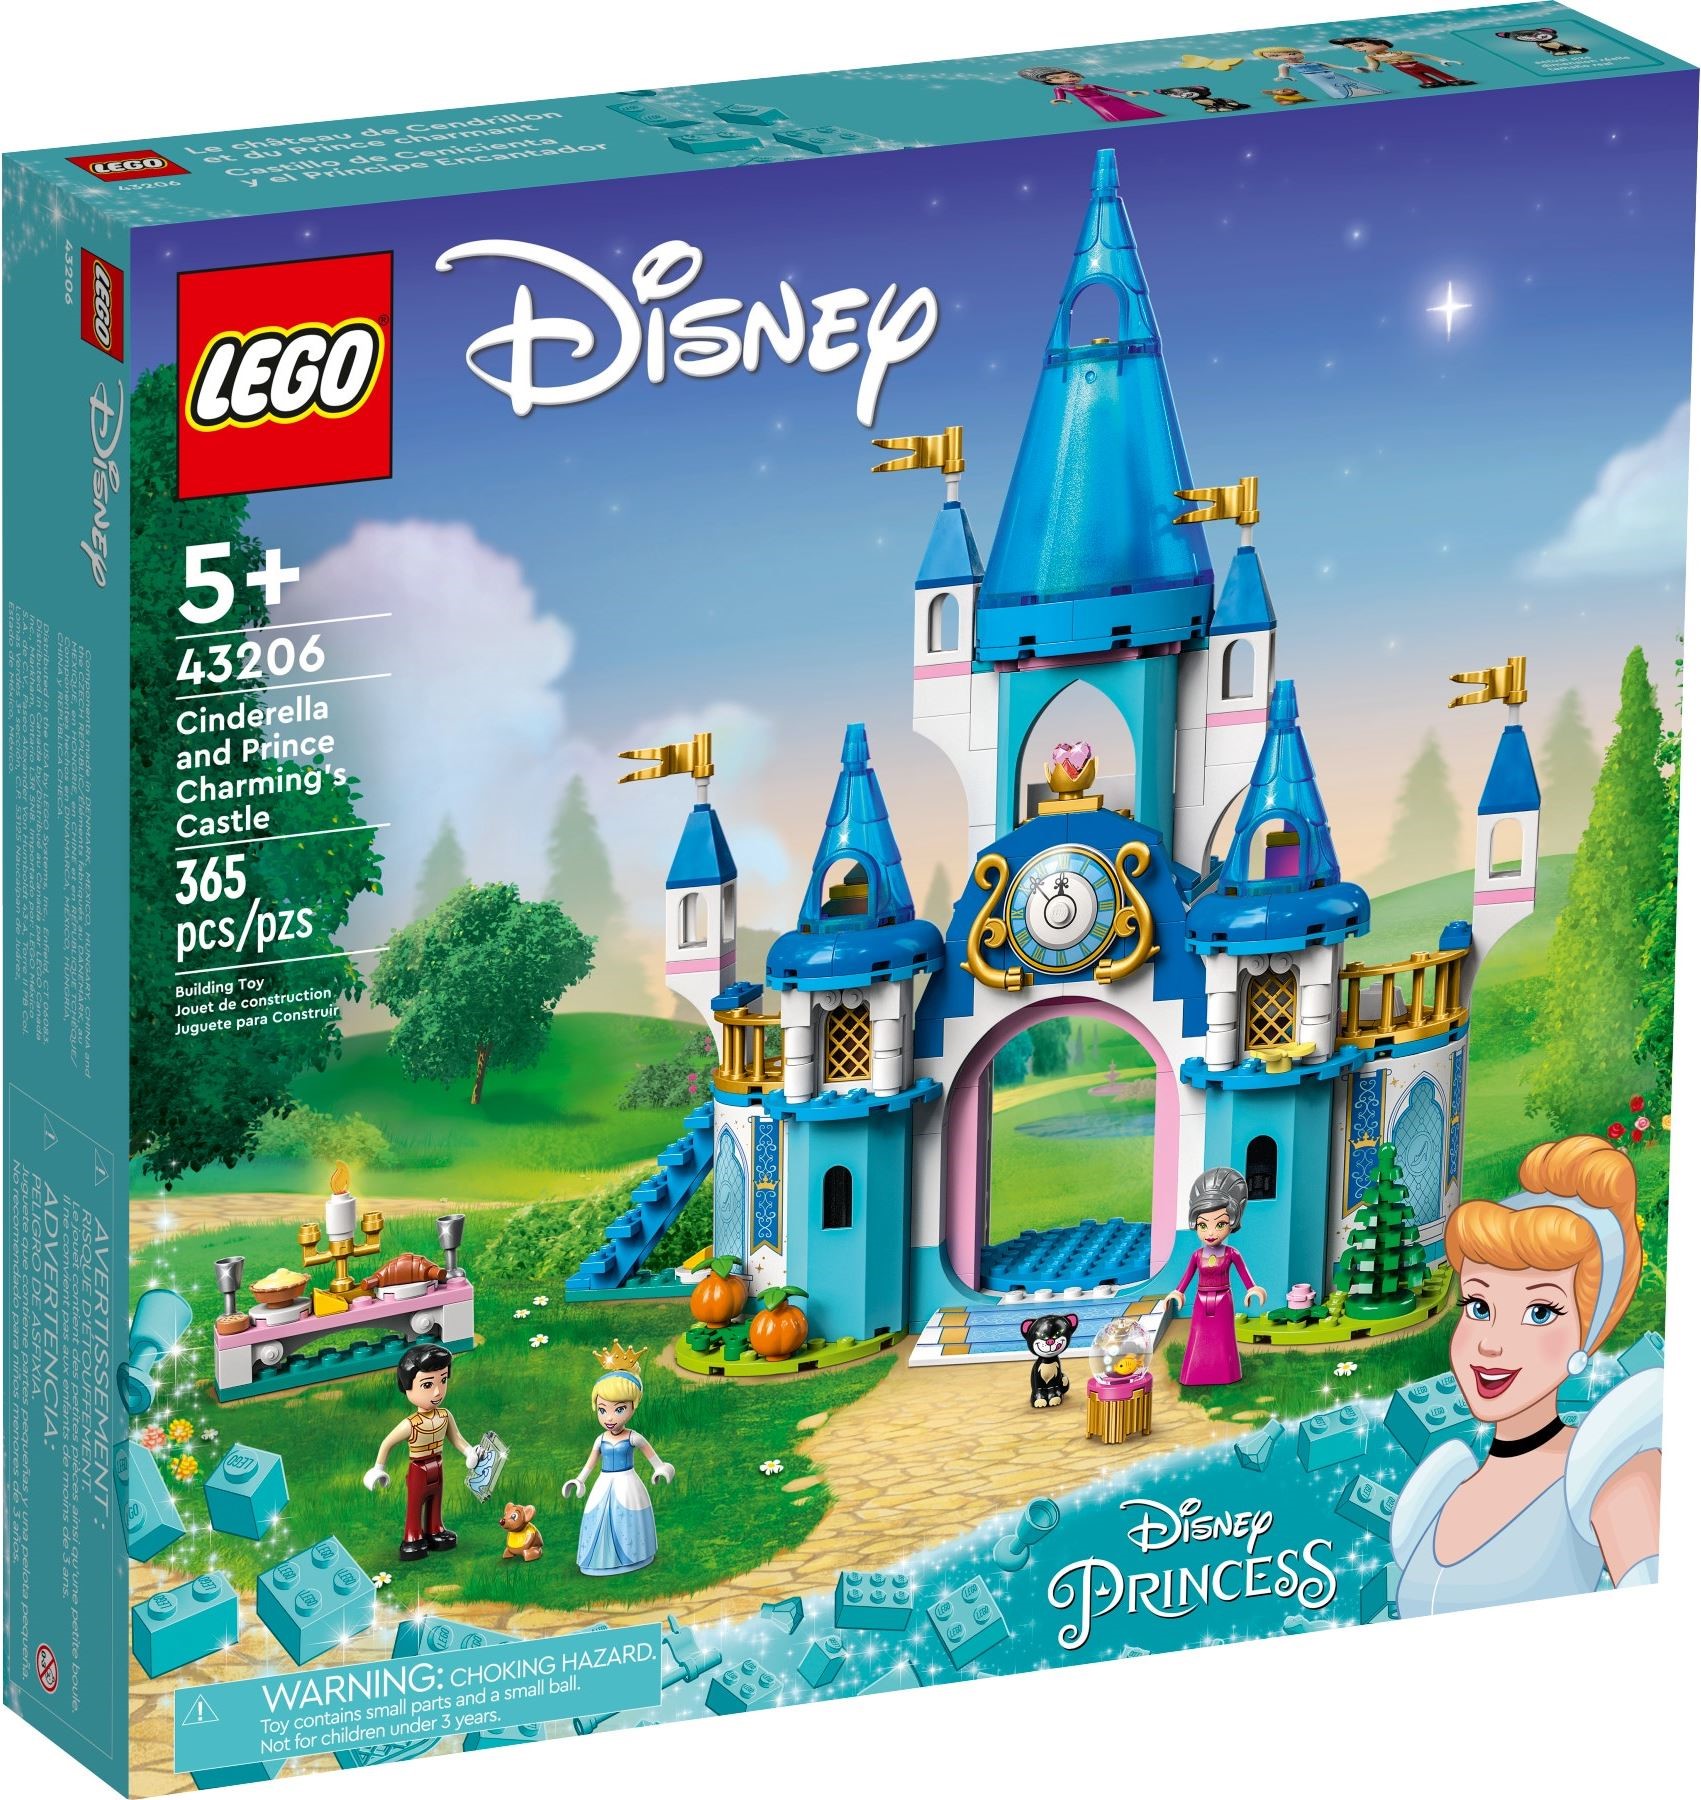 43206 Cinderella And Prince Charming's Castle